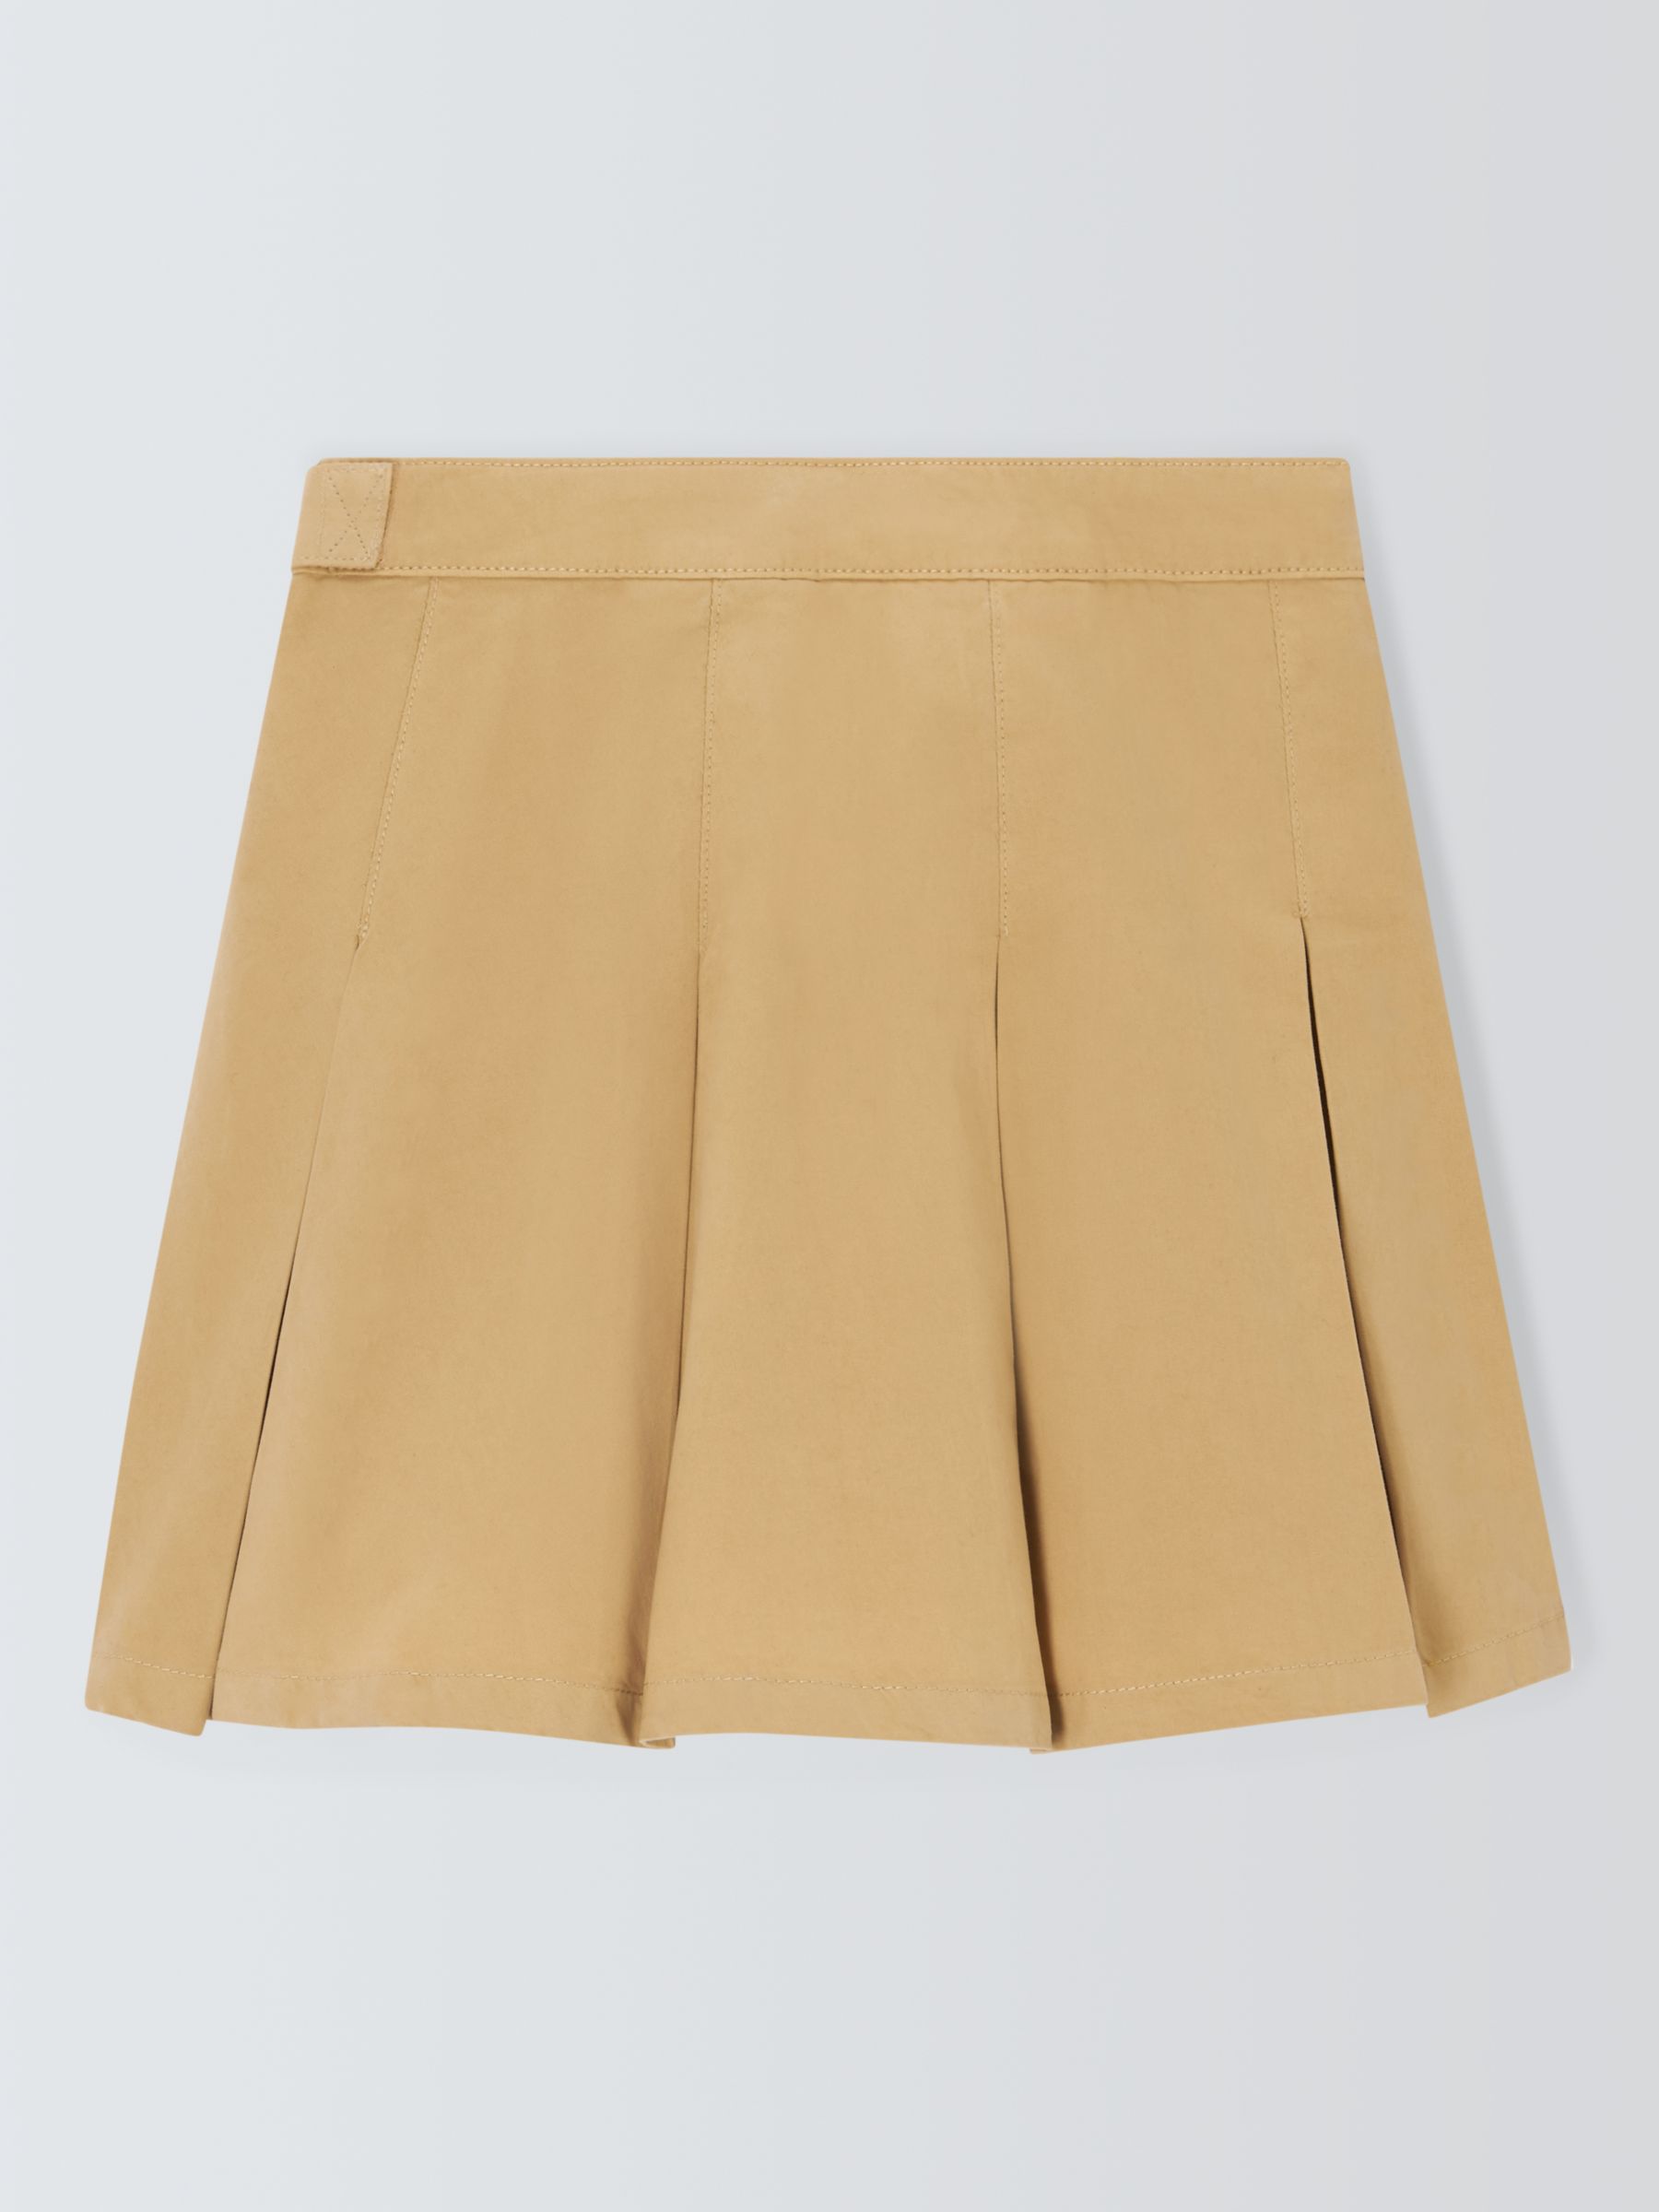 John Lewis Cotton Twill Pleated Skirt, Taos Taupe, 12 years